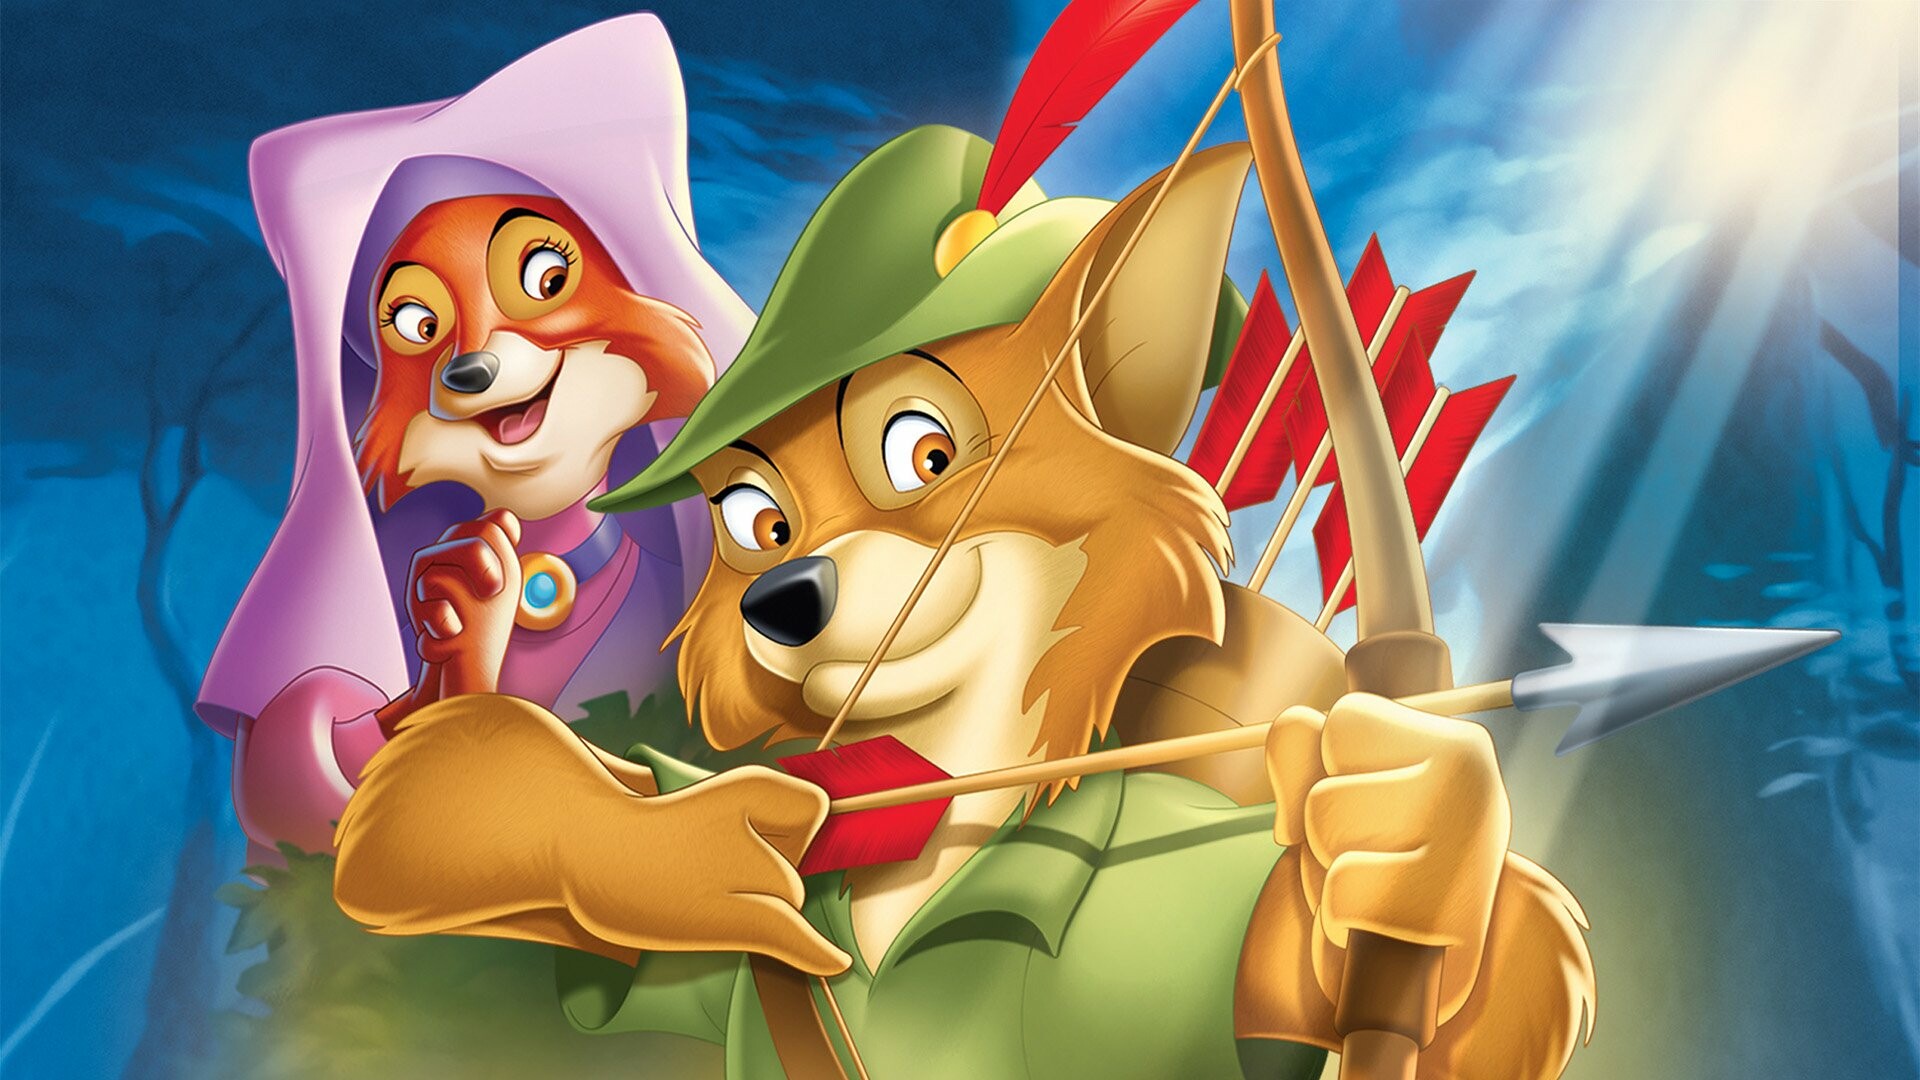 Robin Hood (Cartoon): The film features the voices of Brian Bedford, Phil Harris, Peter Ustinov, Pat Buttram, and Carole Shelley. 1920x1080 Full HD Wallpaper.